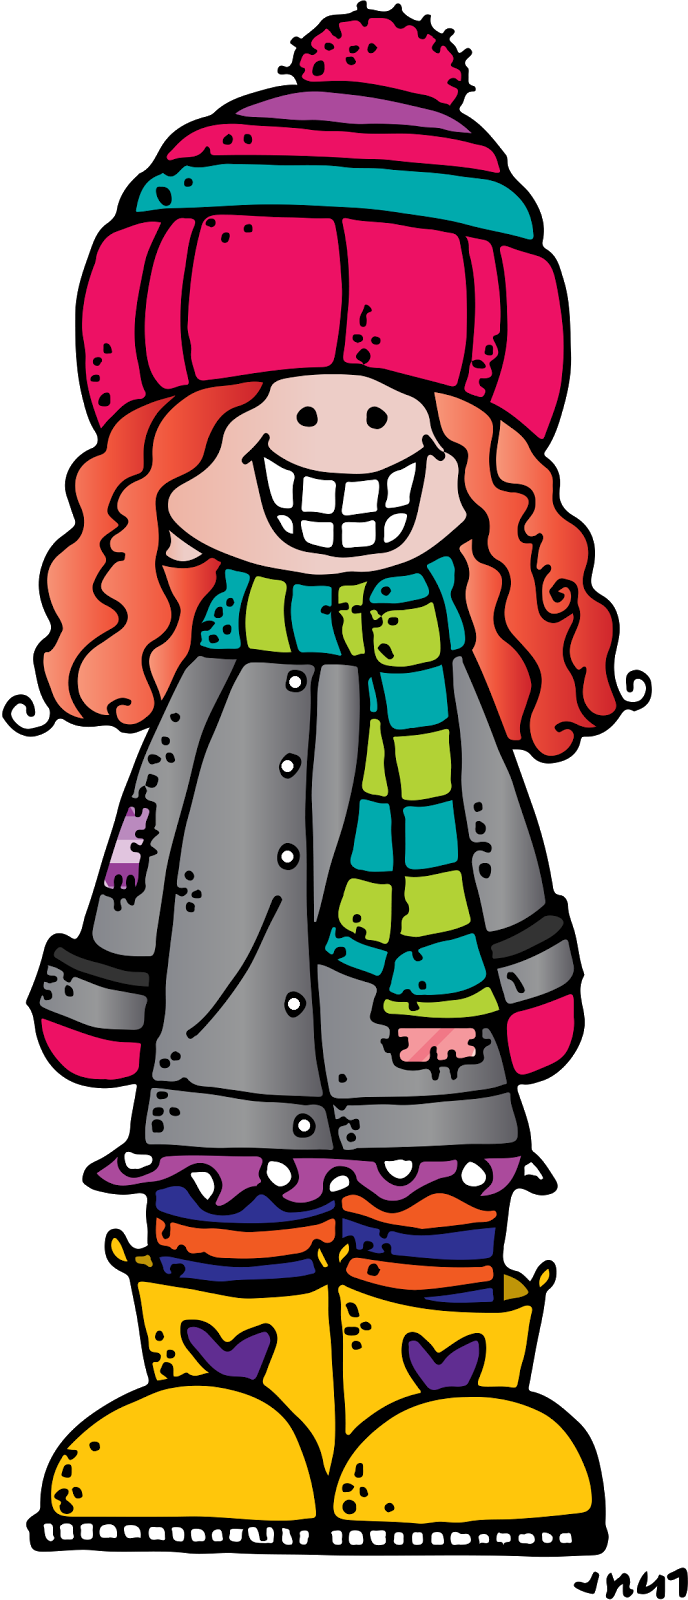 Colorful Winter Clothing Cartoon PNG image